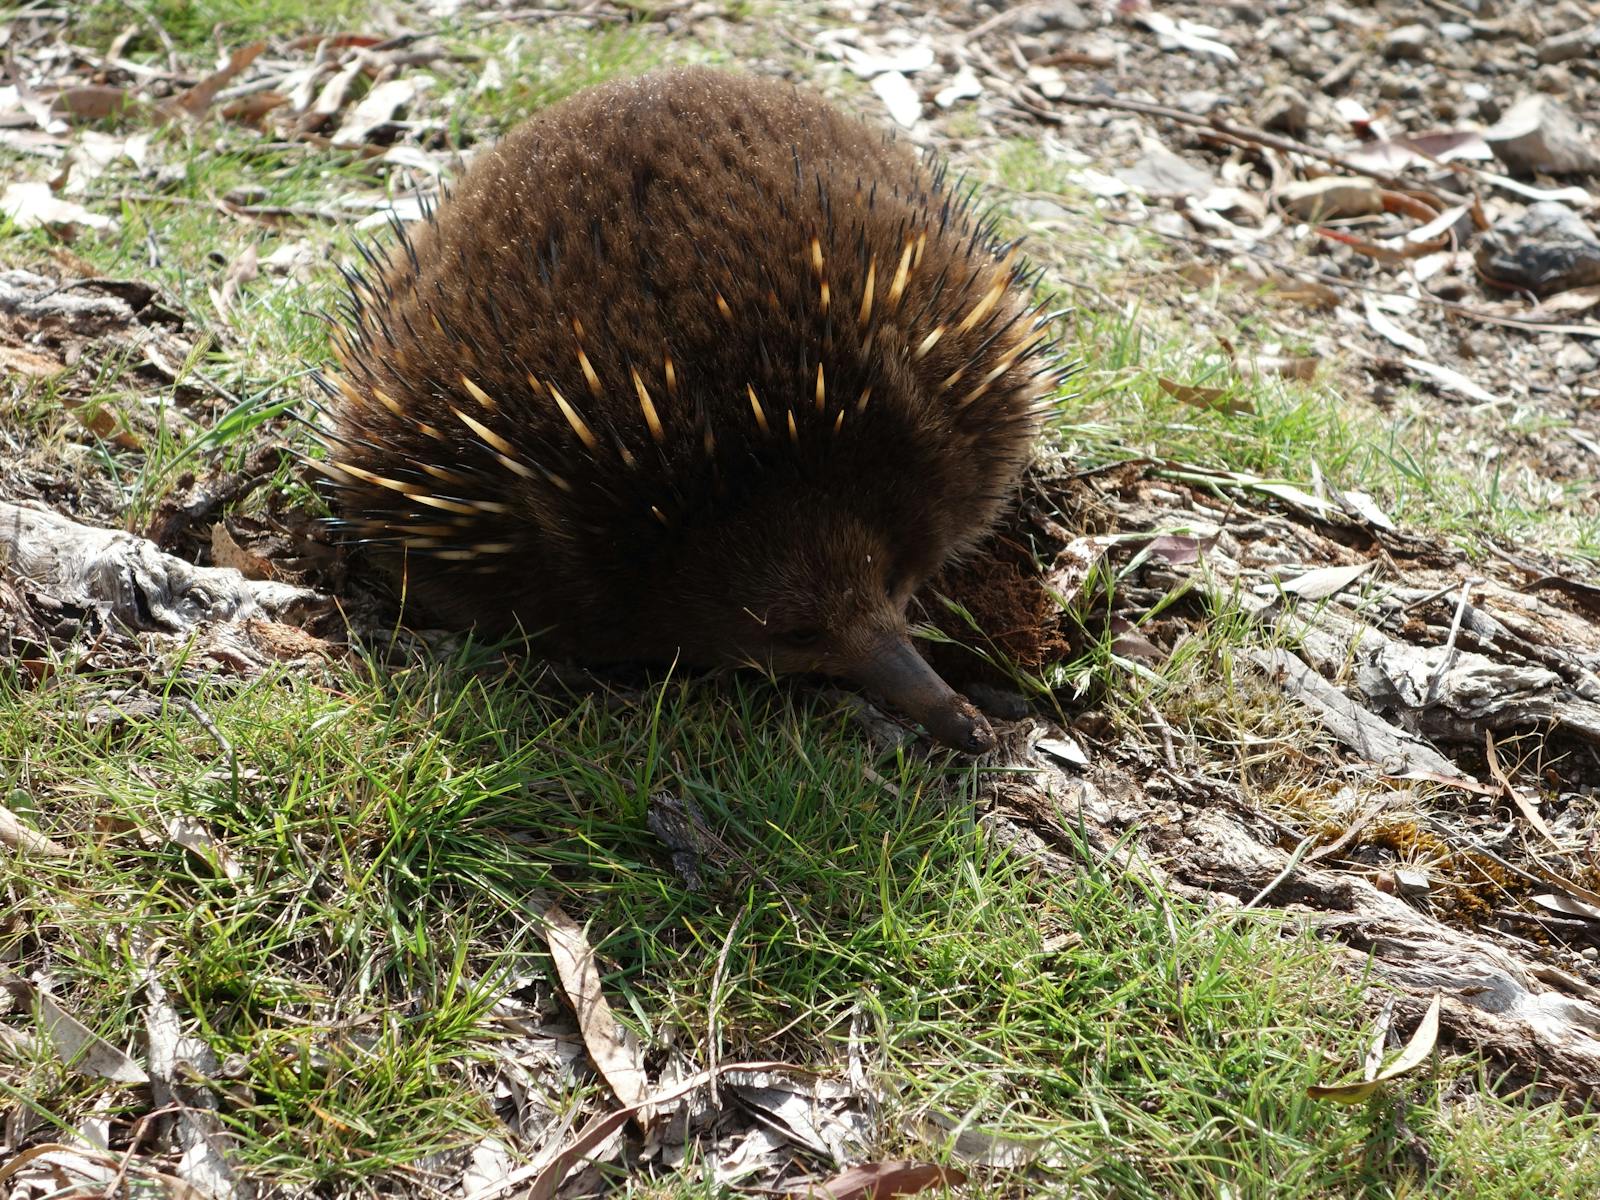 There are two resident echidnas on this 40 ha property. Best seen in the warmer months.